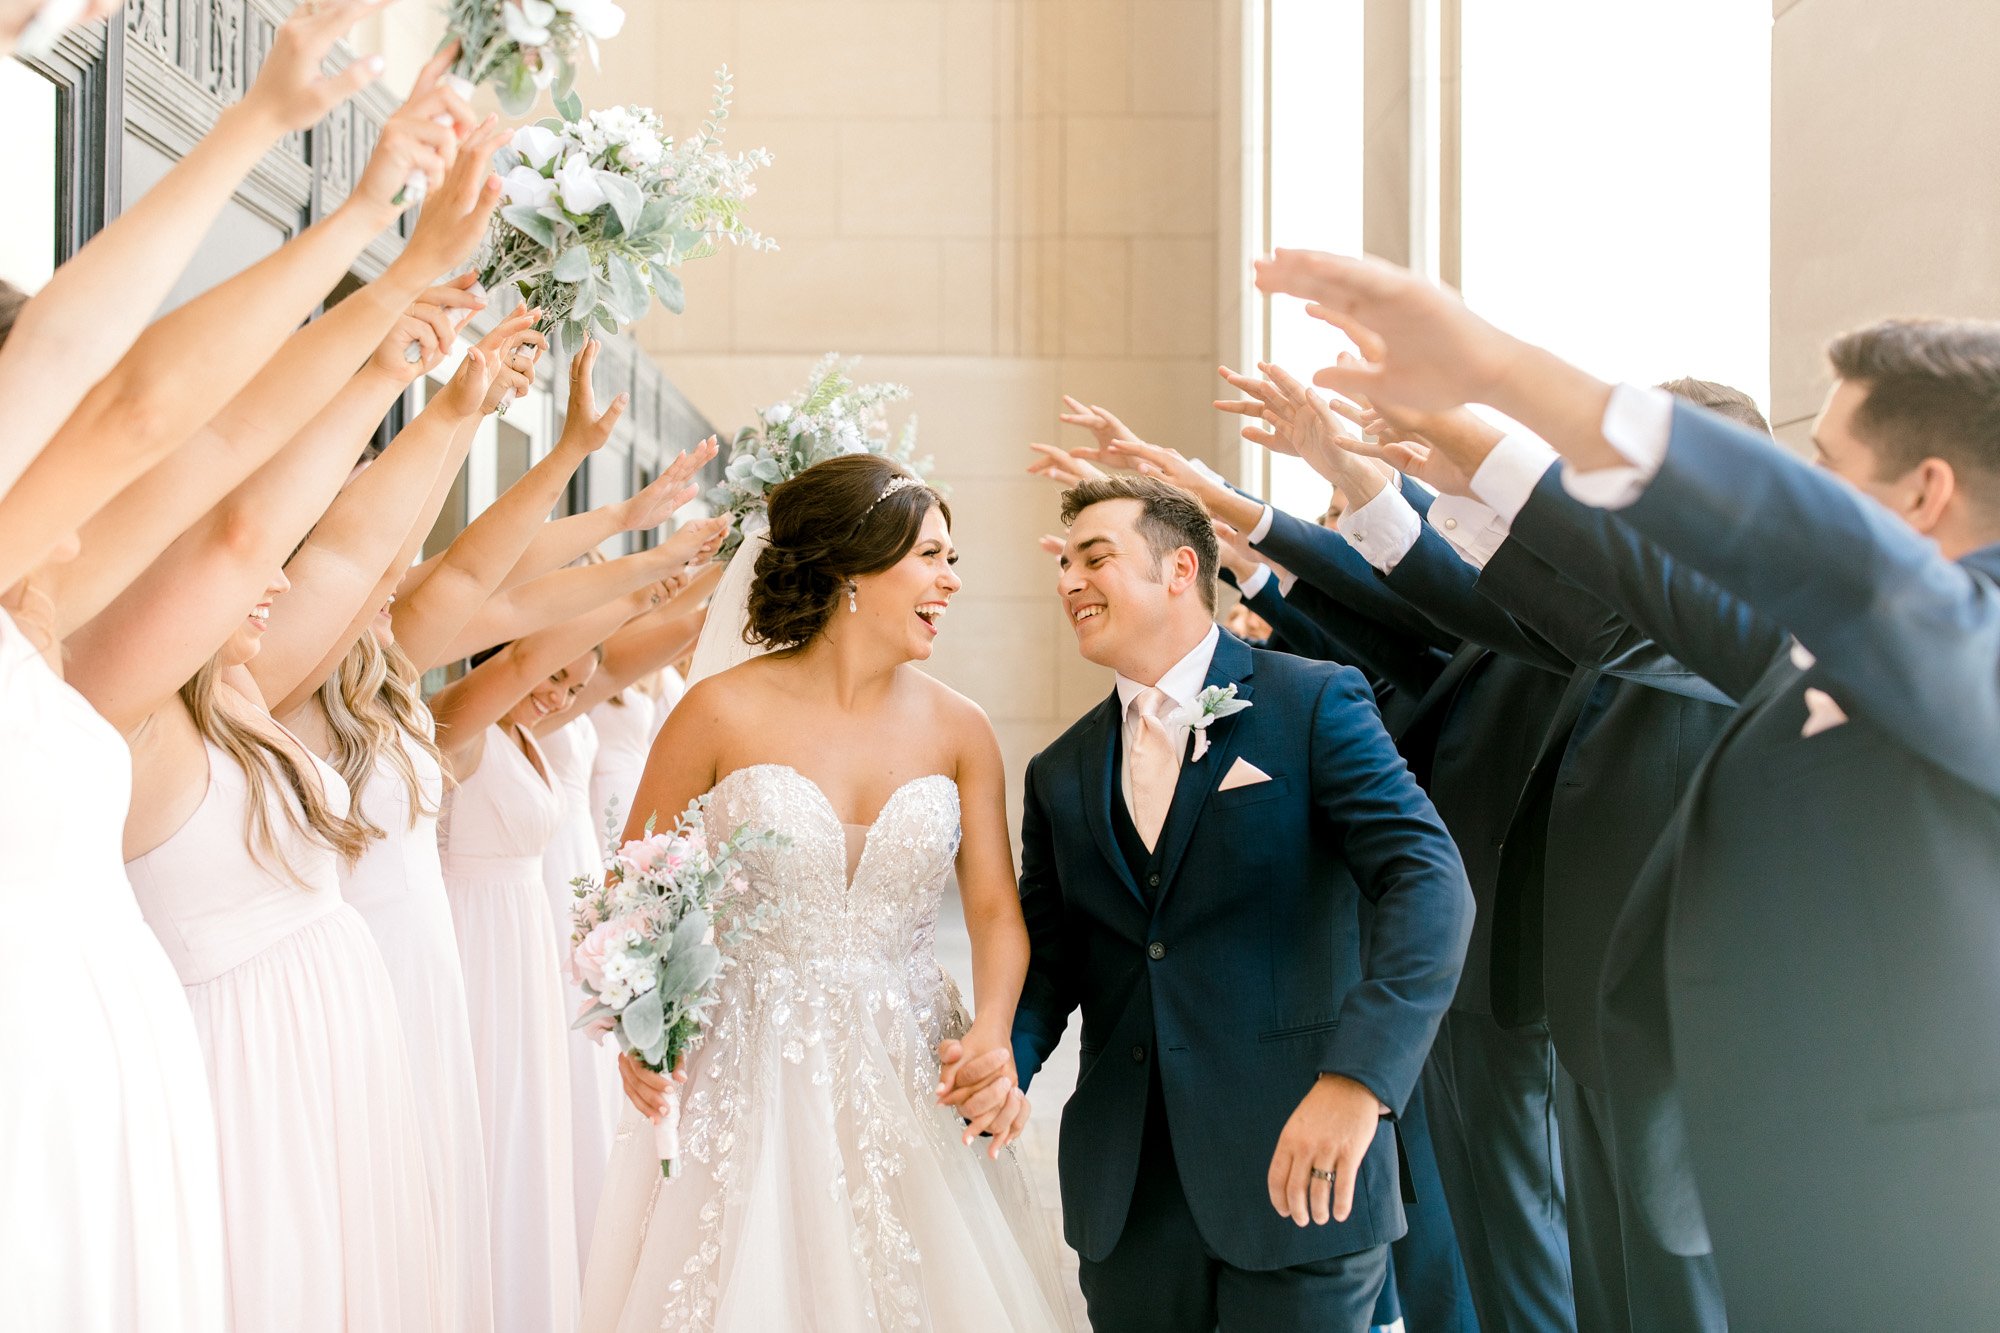 Clearwater Place Events Grand Rapids Wedding | Light &amp; Airy West Michigan Wedding Photography | Fine Art Weddings | Romantic &amp; Timeless